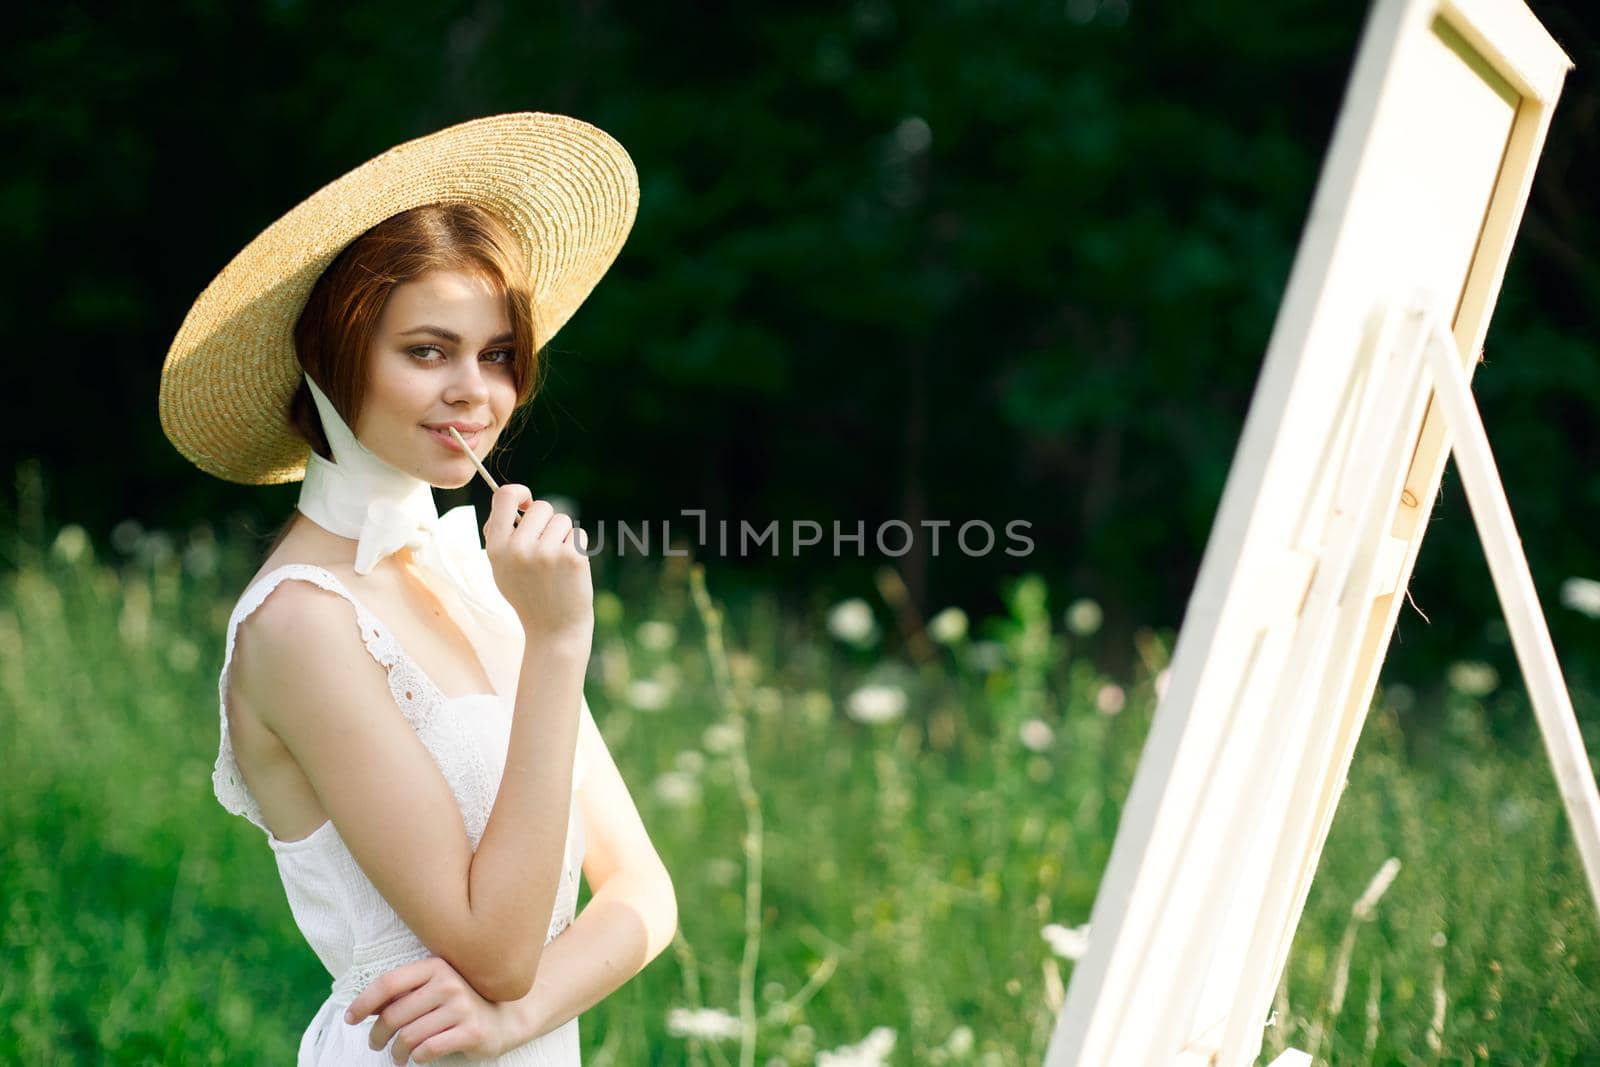 Woman in white dress artist hobby nature landscape. High quality photo